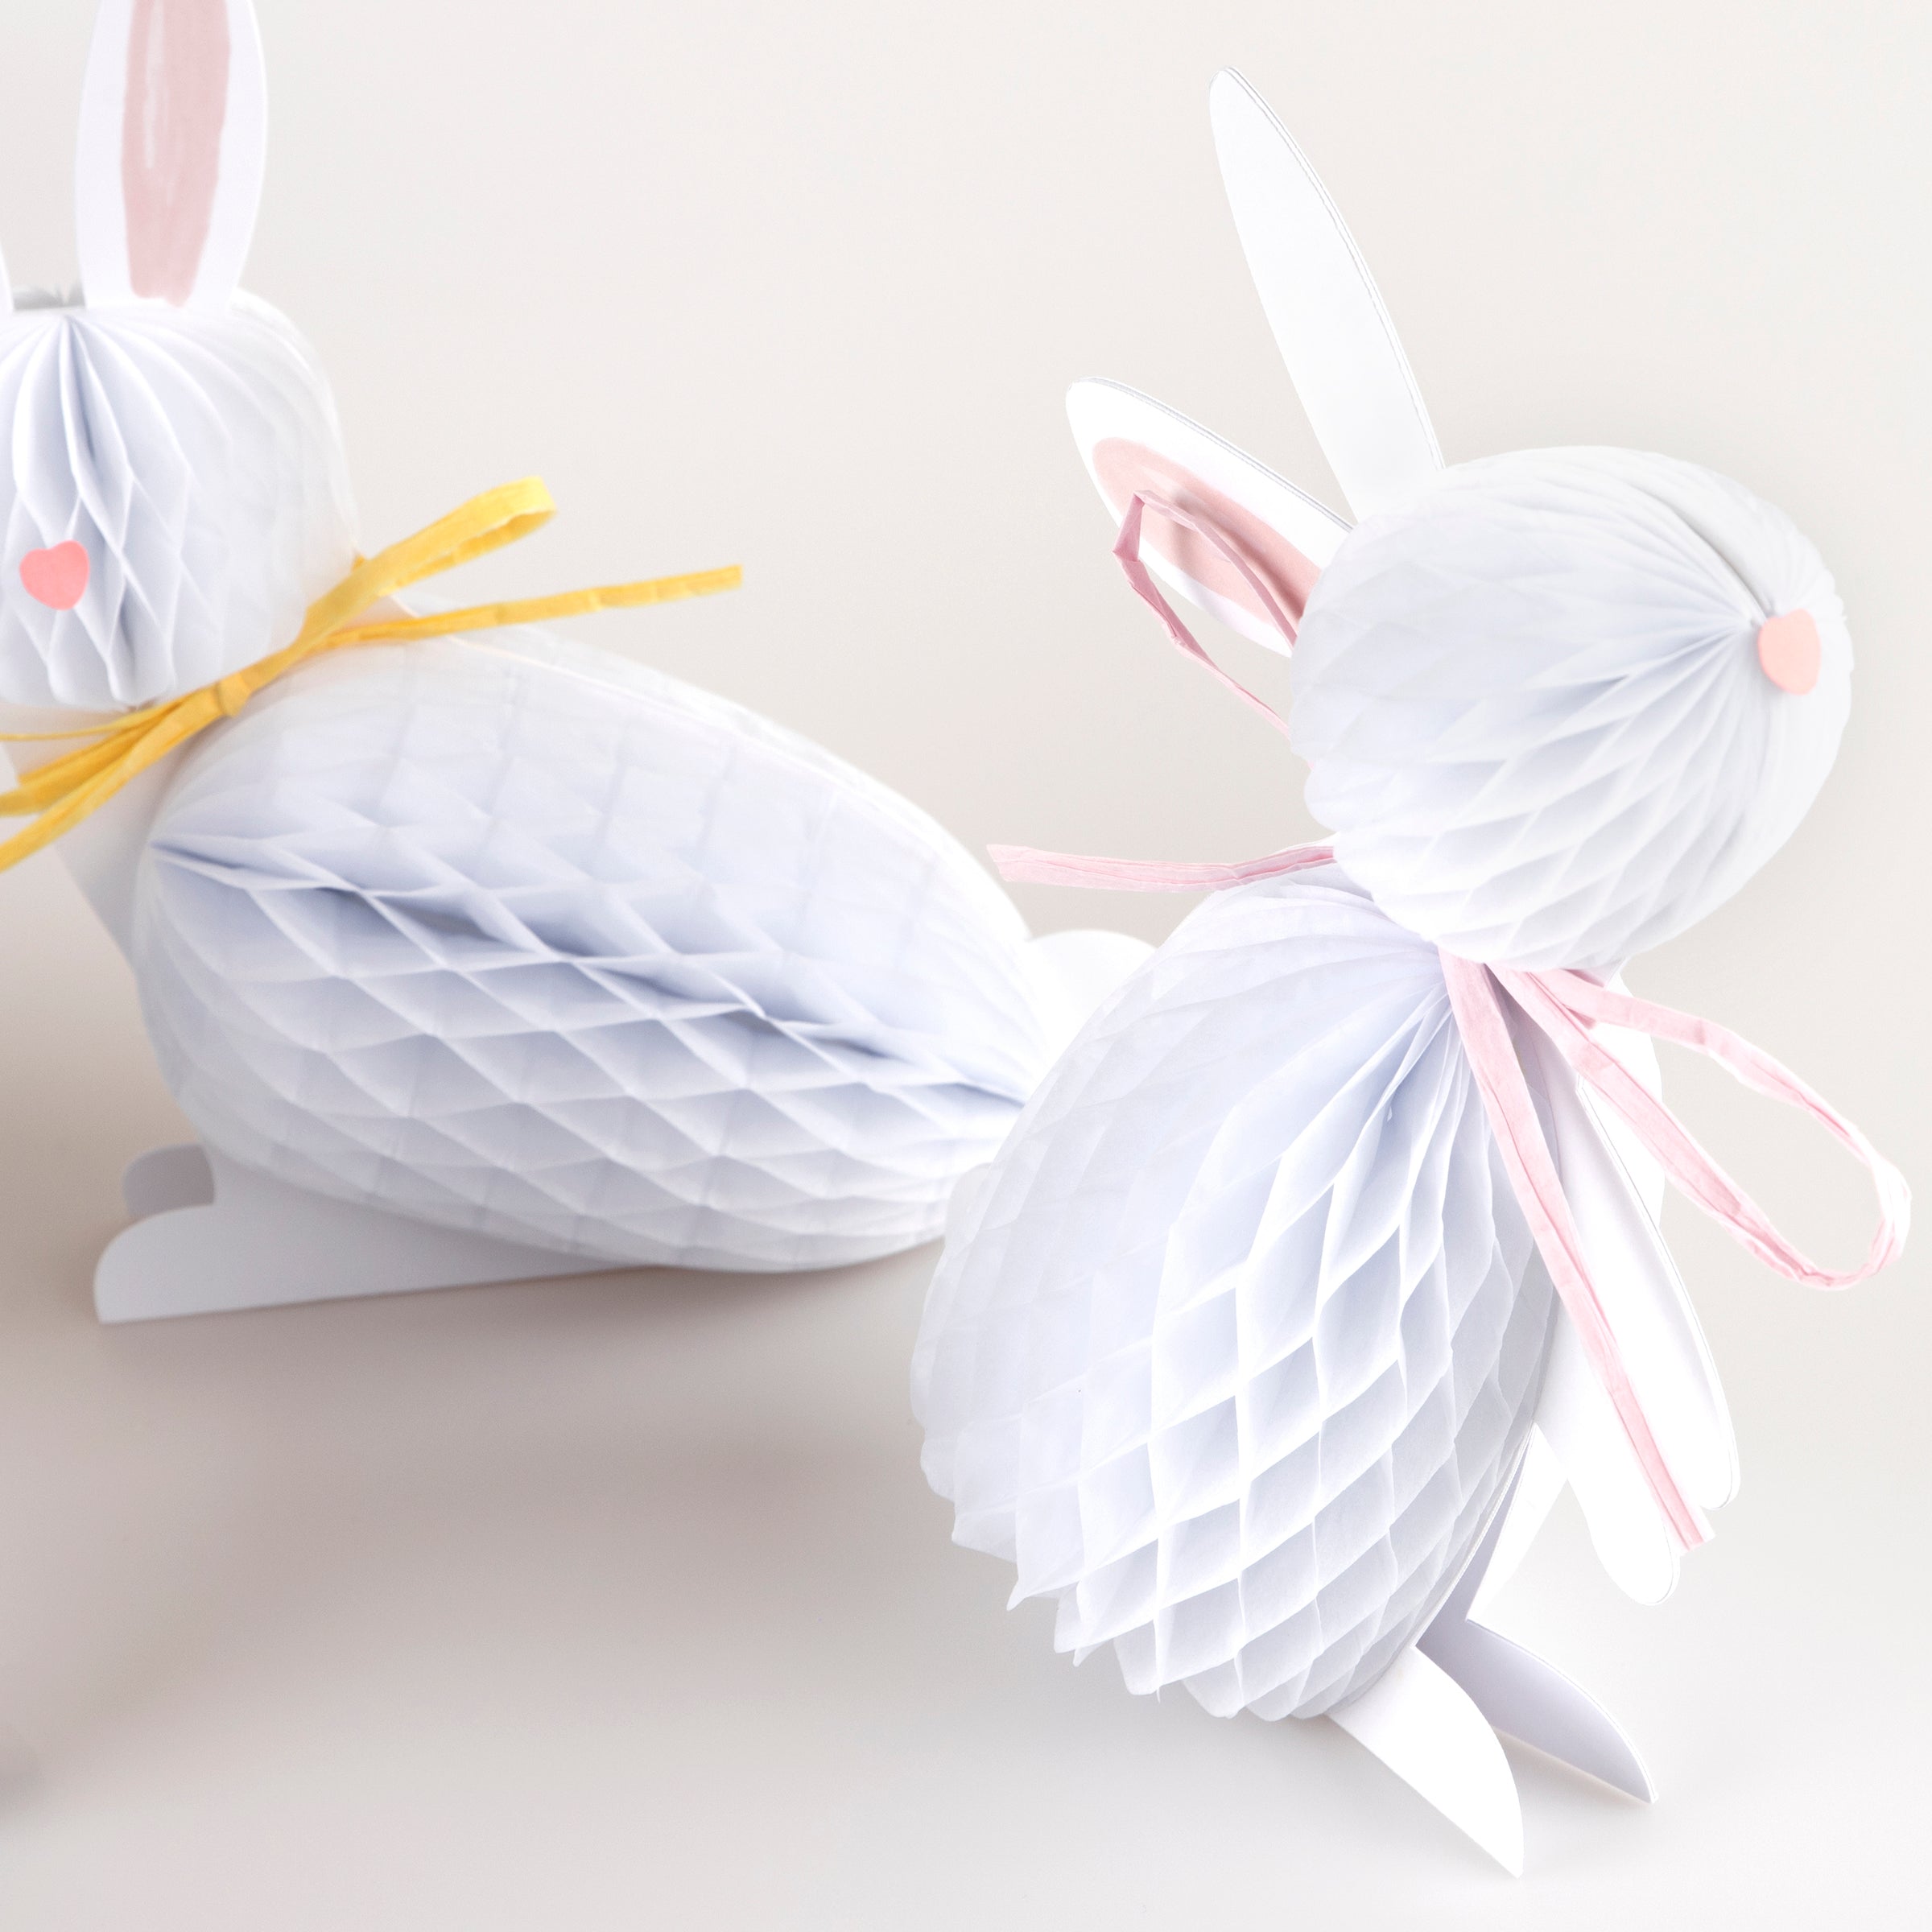 Our Easter bunny decorations, crafted with honeycomb paper and raffia ribbons, look amazing.